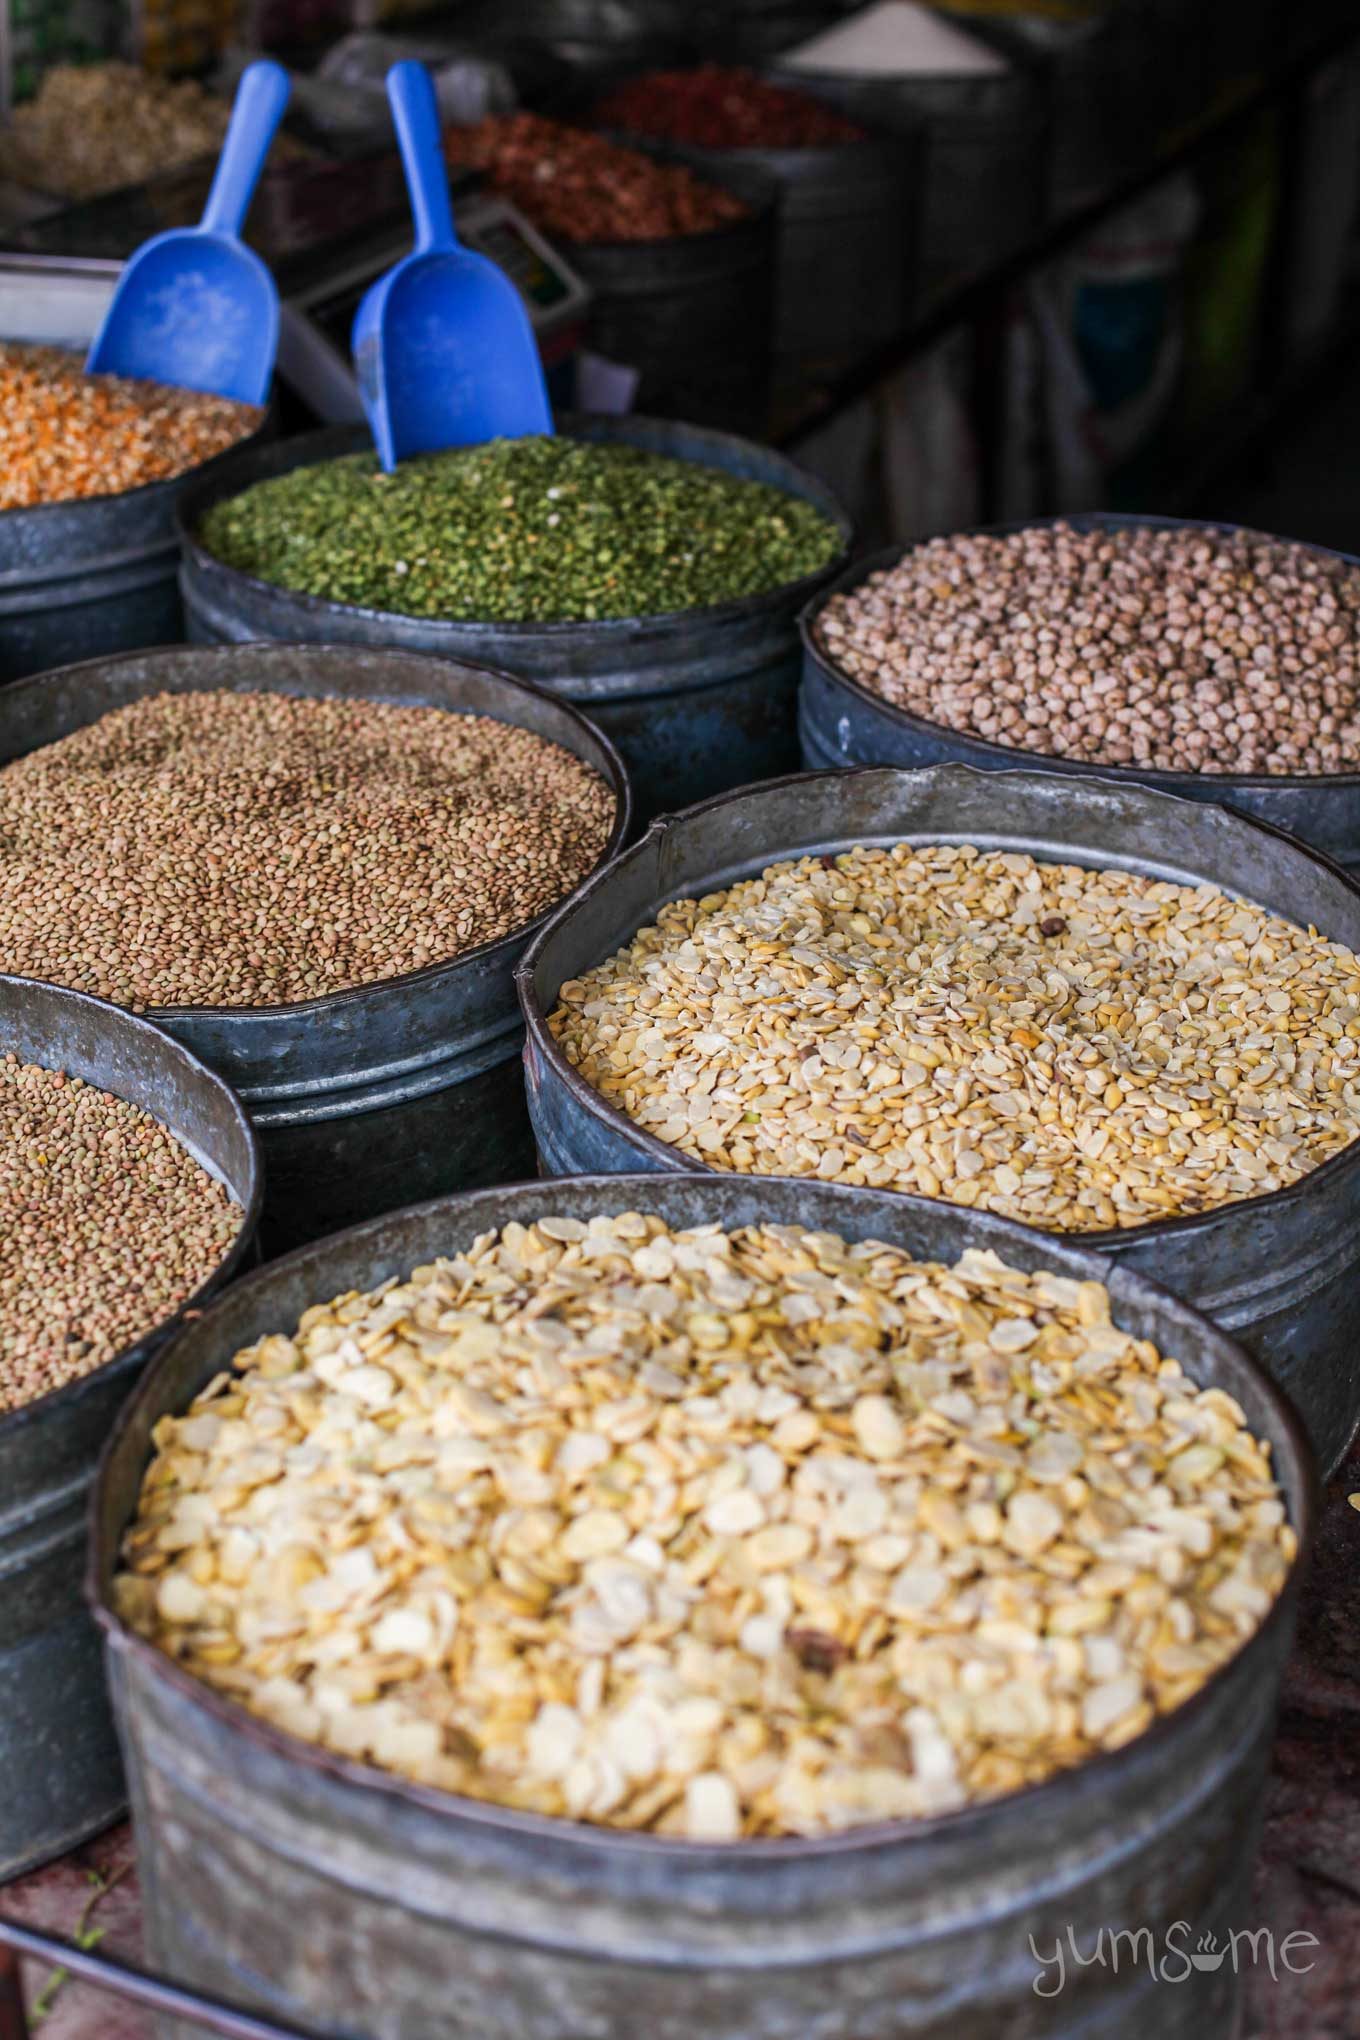 pulses and beans in the souk | yumsome.com